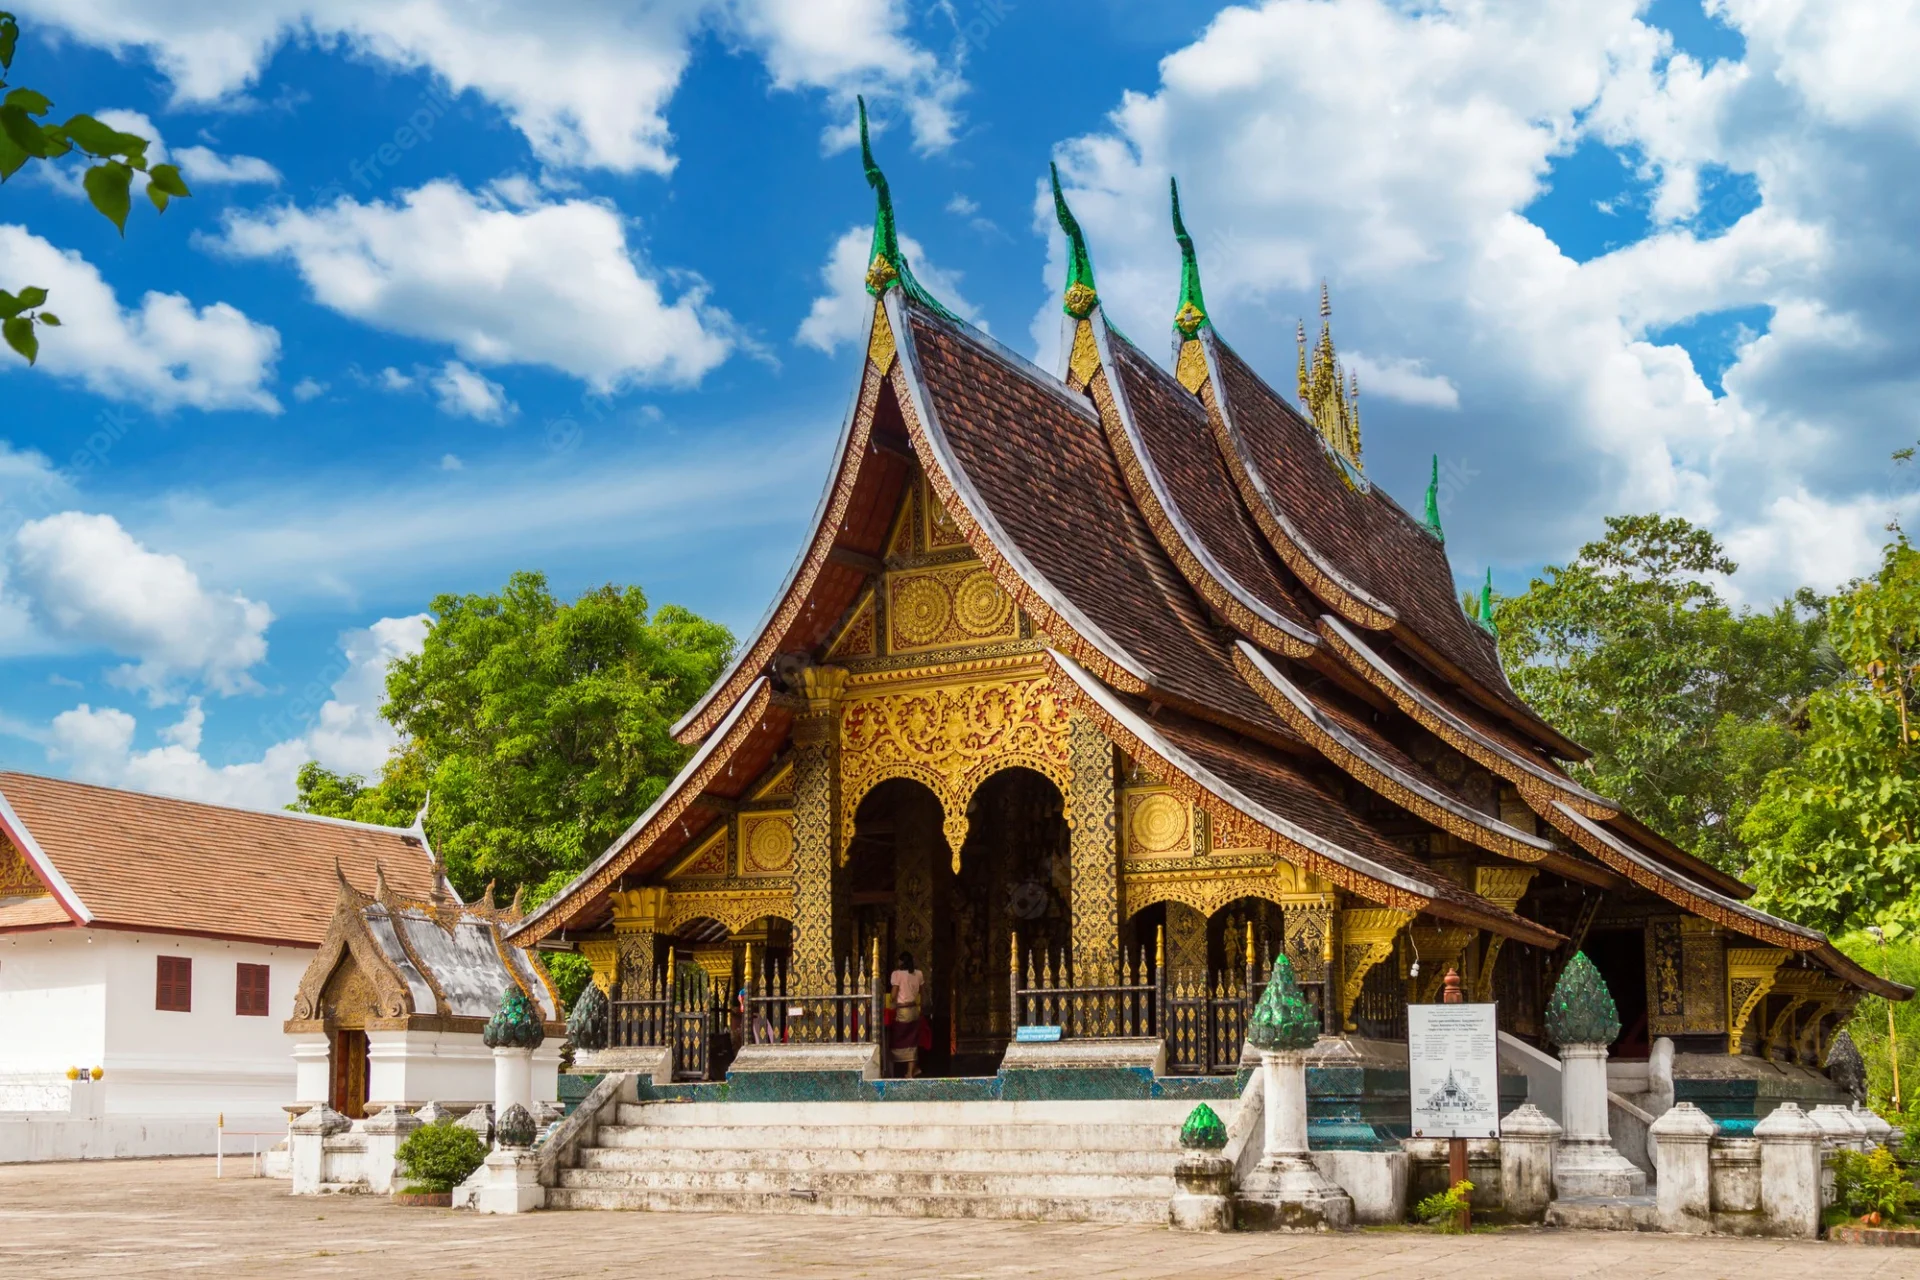 Explore Laos in Special Package for 12 Days